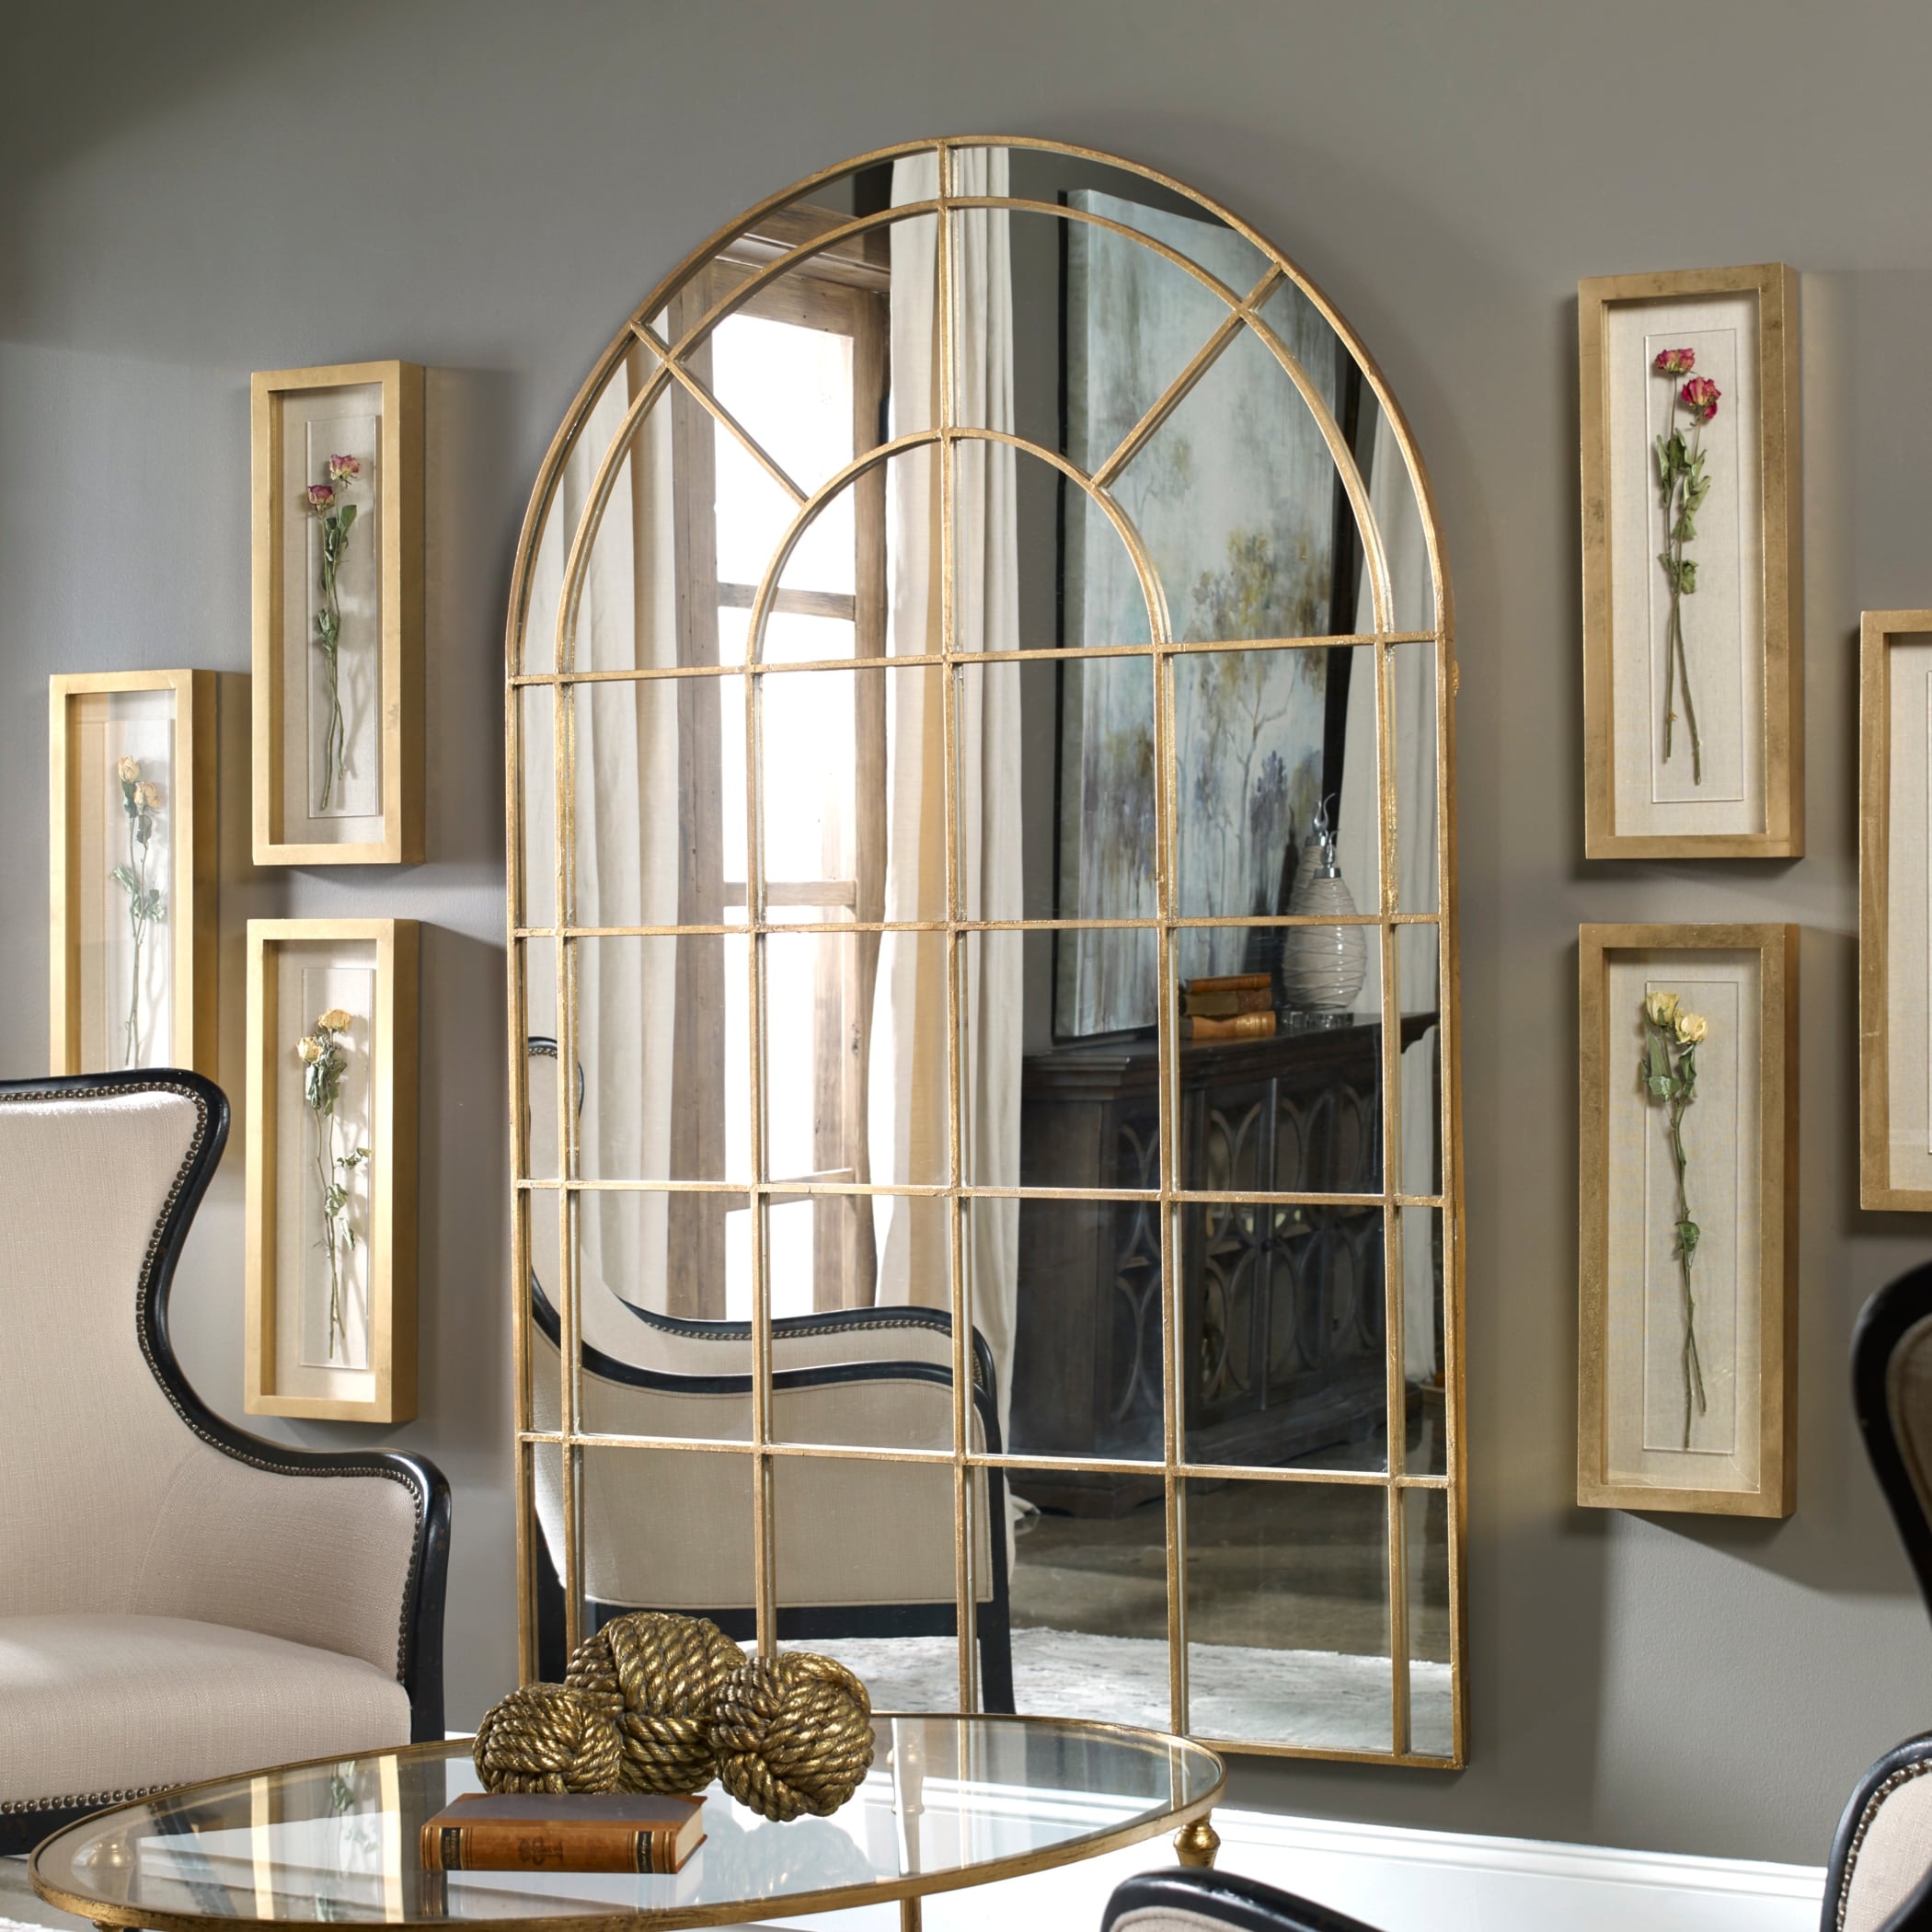 Uttermost Arched Mirrors Grantola Arched Mirror Stuckey Furniture  Mirrors Wall